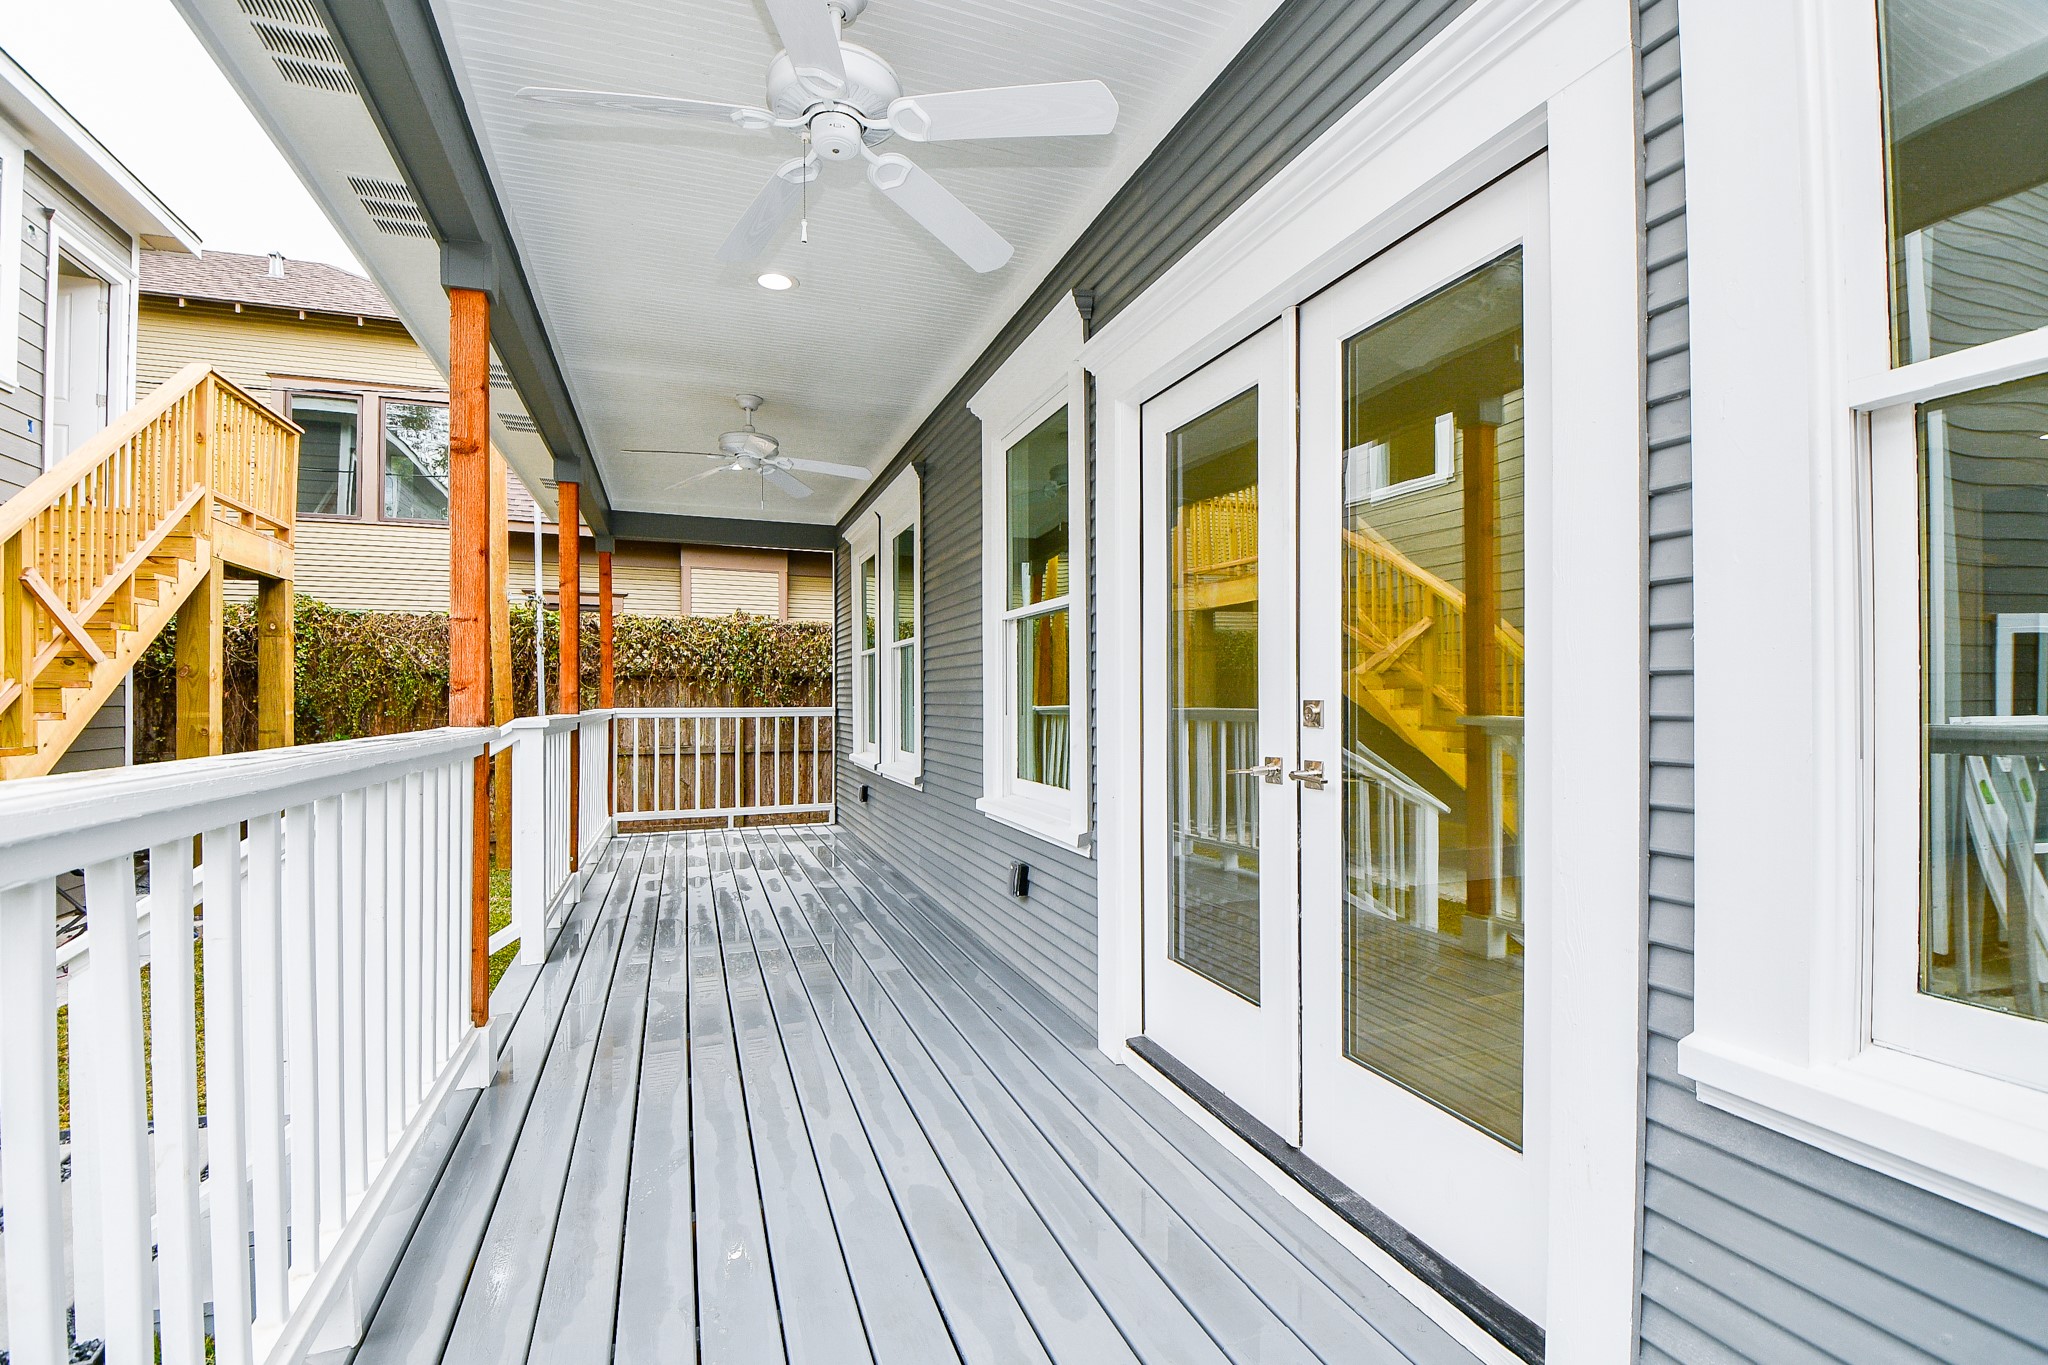 This beautiful, wrap-around back porch really embraces an historical throwback!